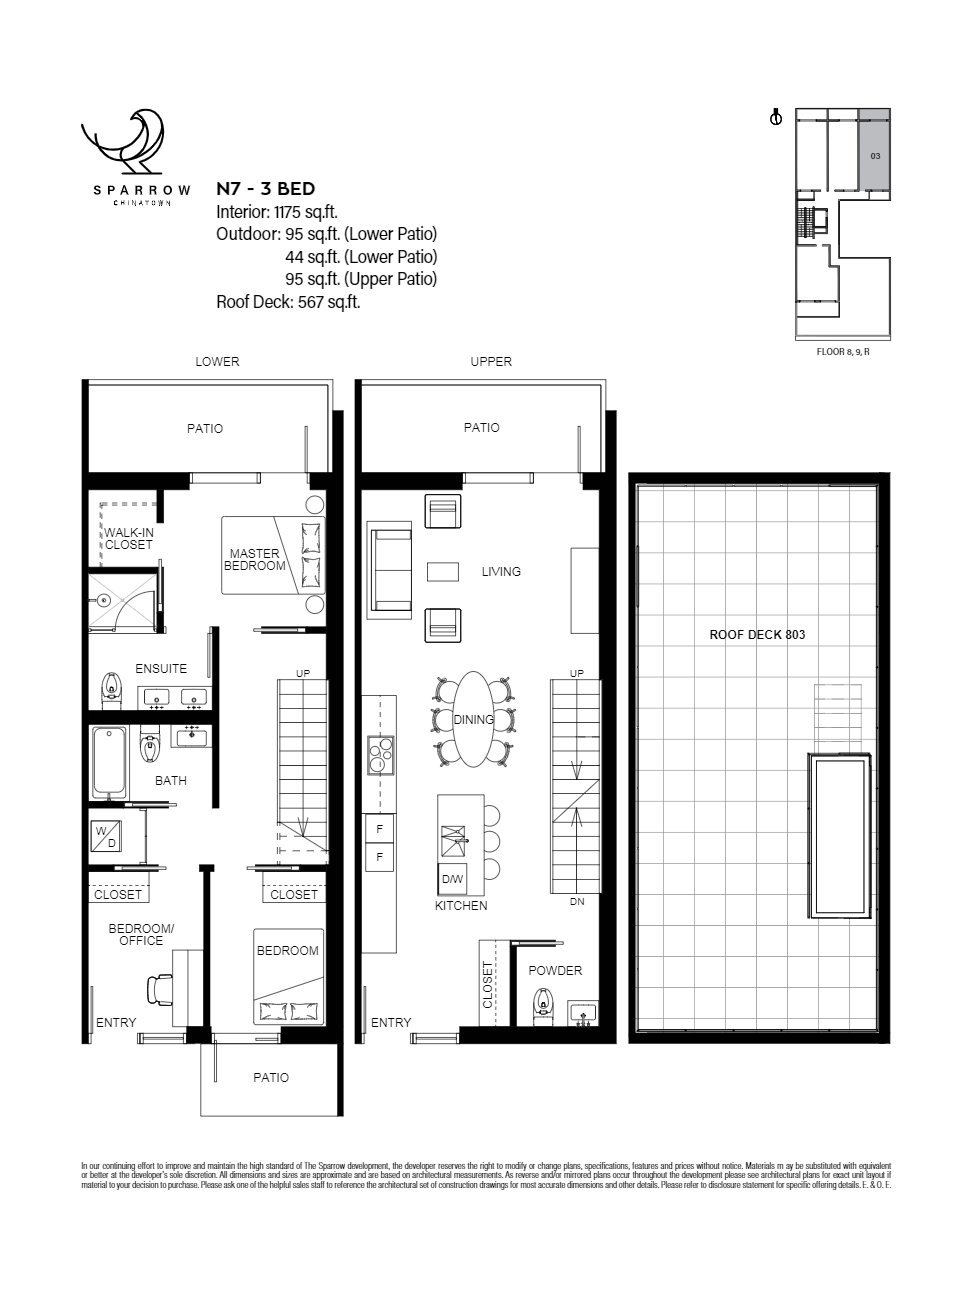 N7 Floor Plan of Sparrow Condos with undefined beds